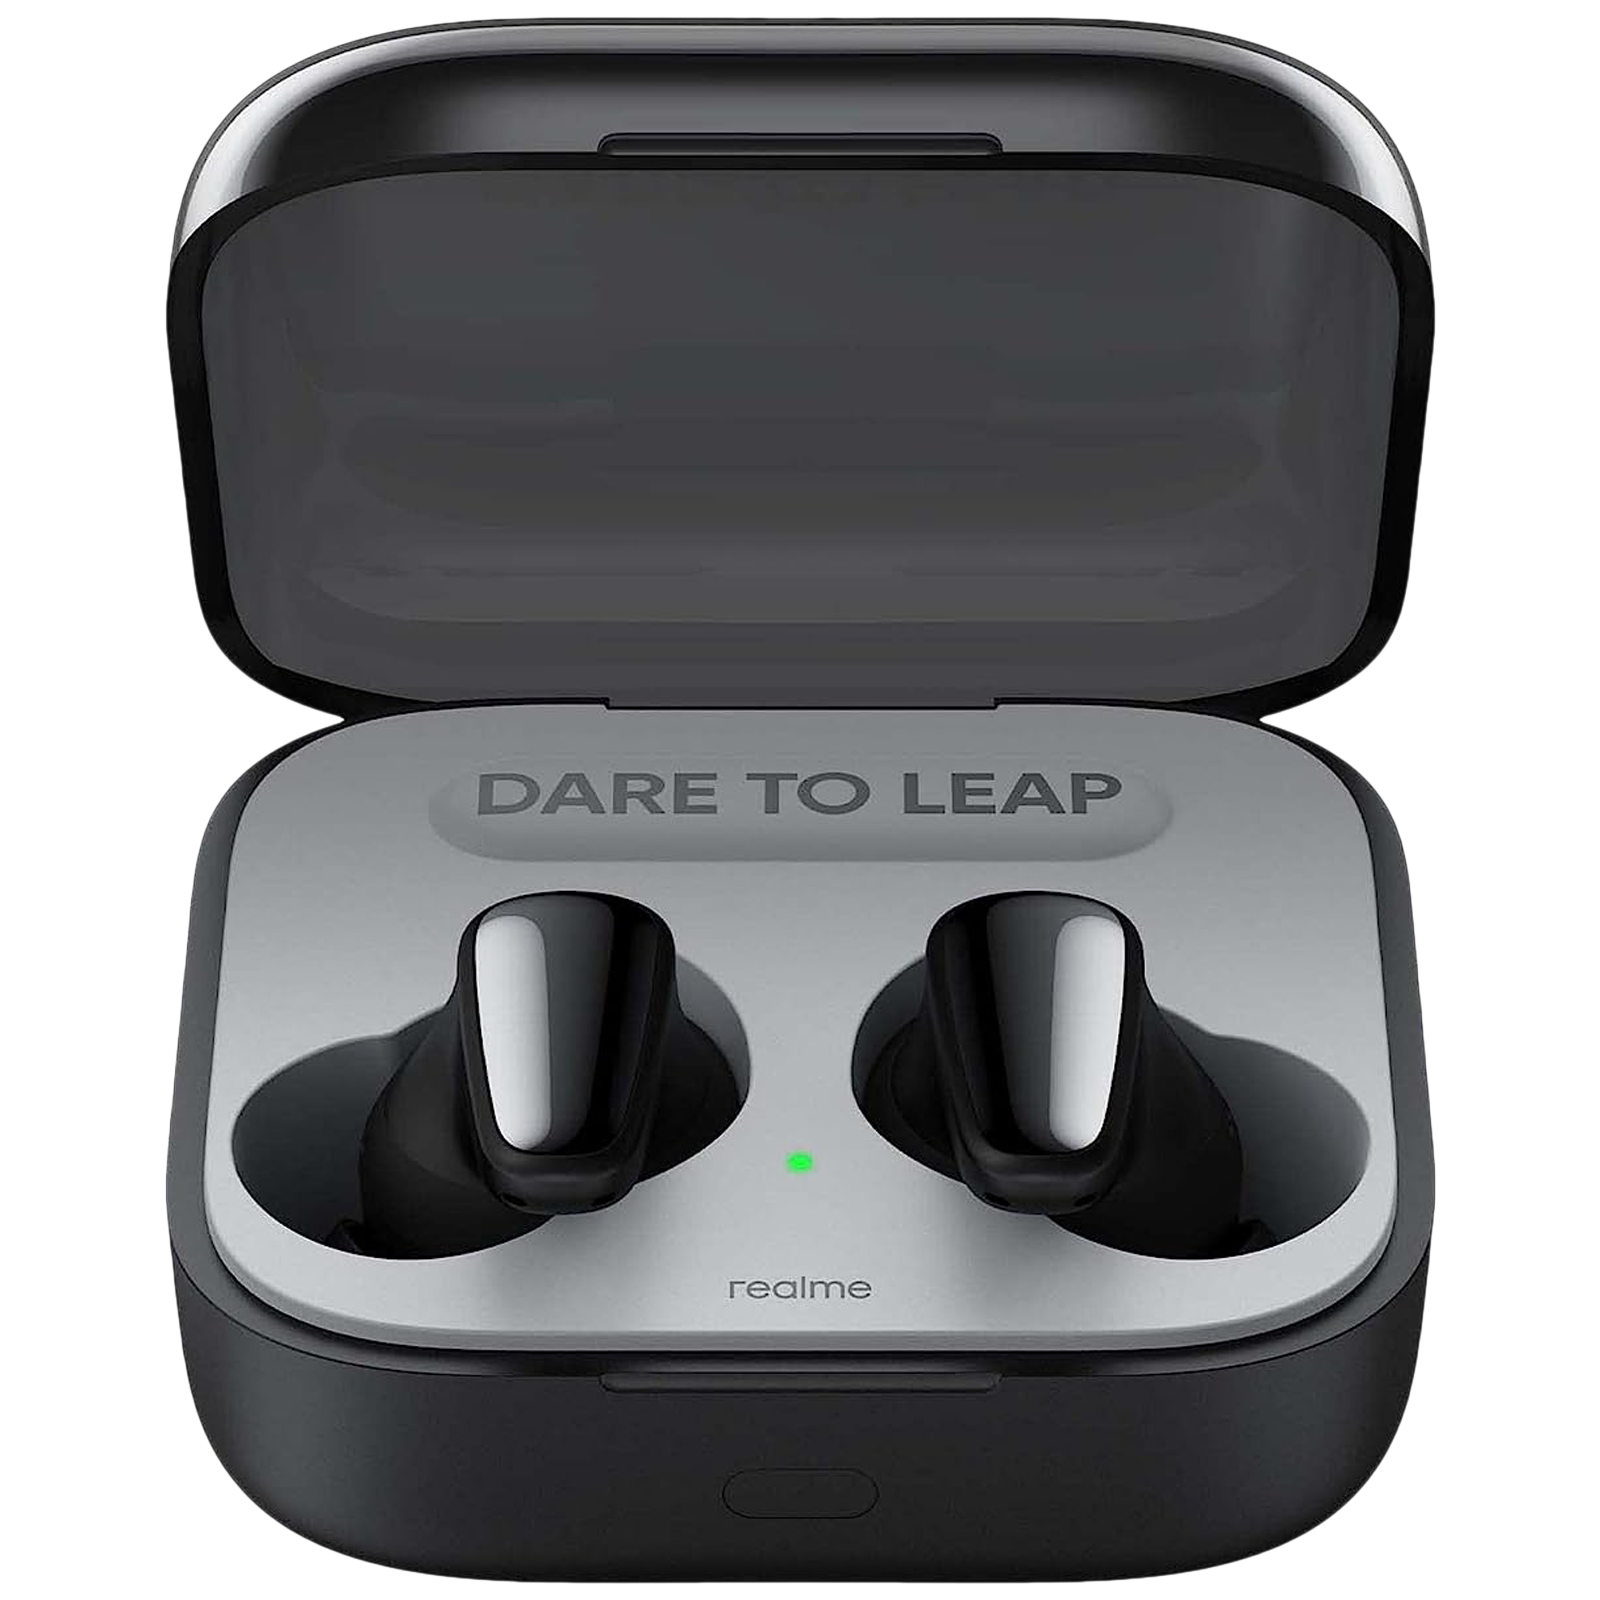 Buy realme Buds Air 3S Bluetooth Truly Wireless in Ear Earbuds, 11mm Triple  Titanium Driver, with Mic AI ENC for Calls, Dual Device Pairing, 30hrs  Total Playback with Fast Charging (Bass Black)